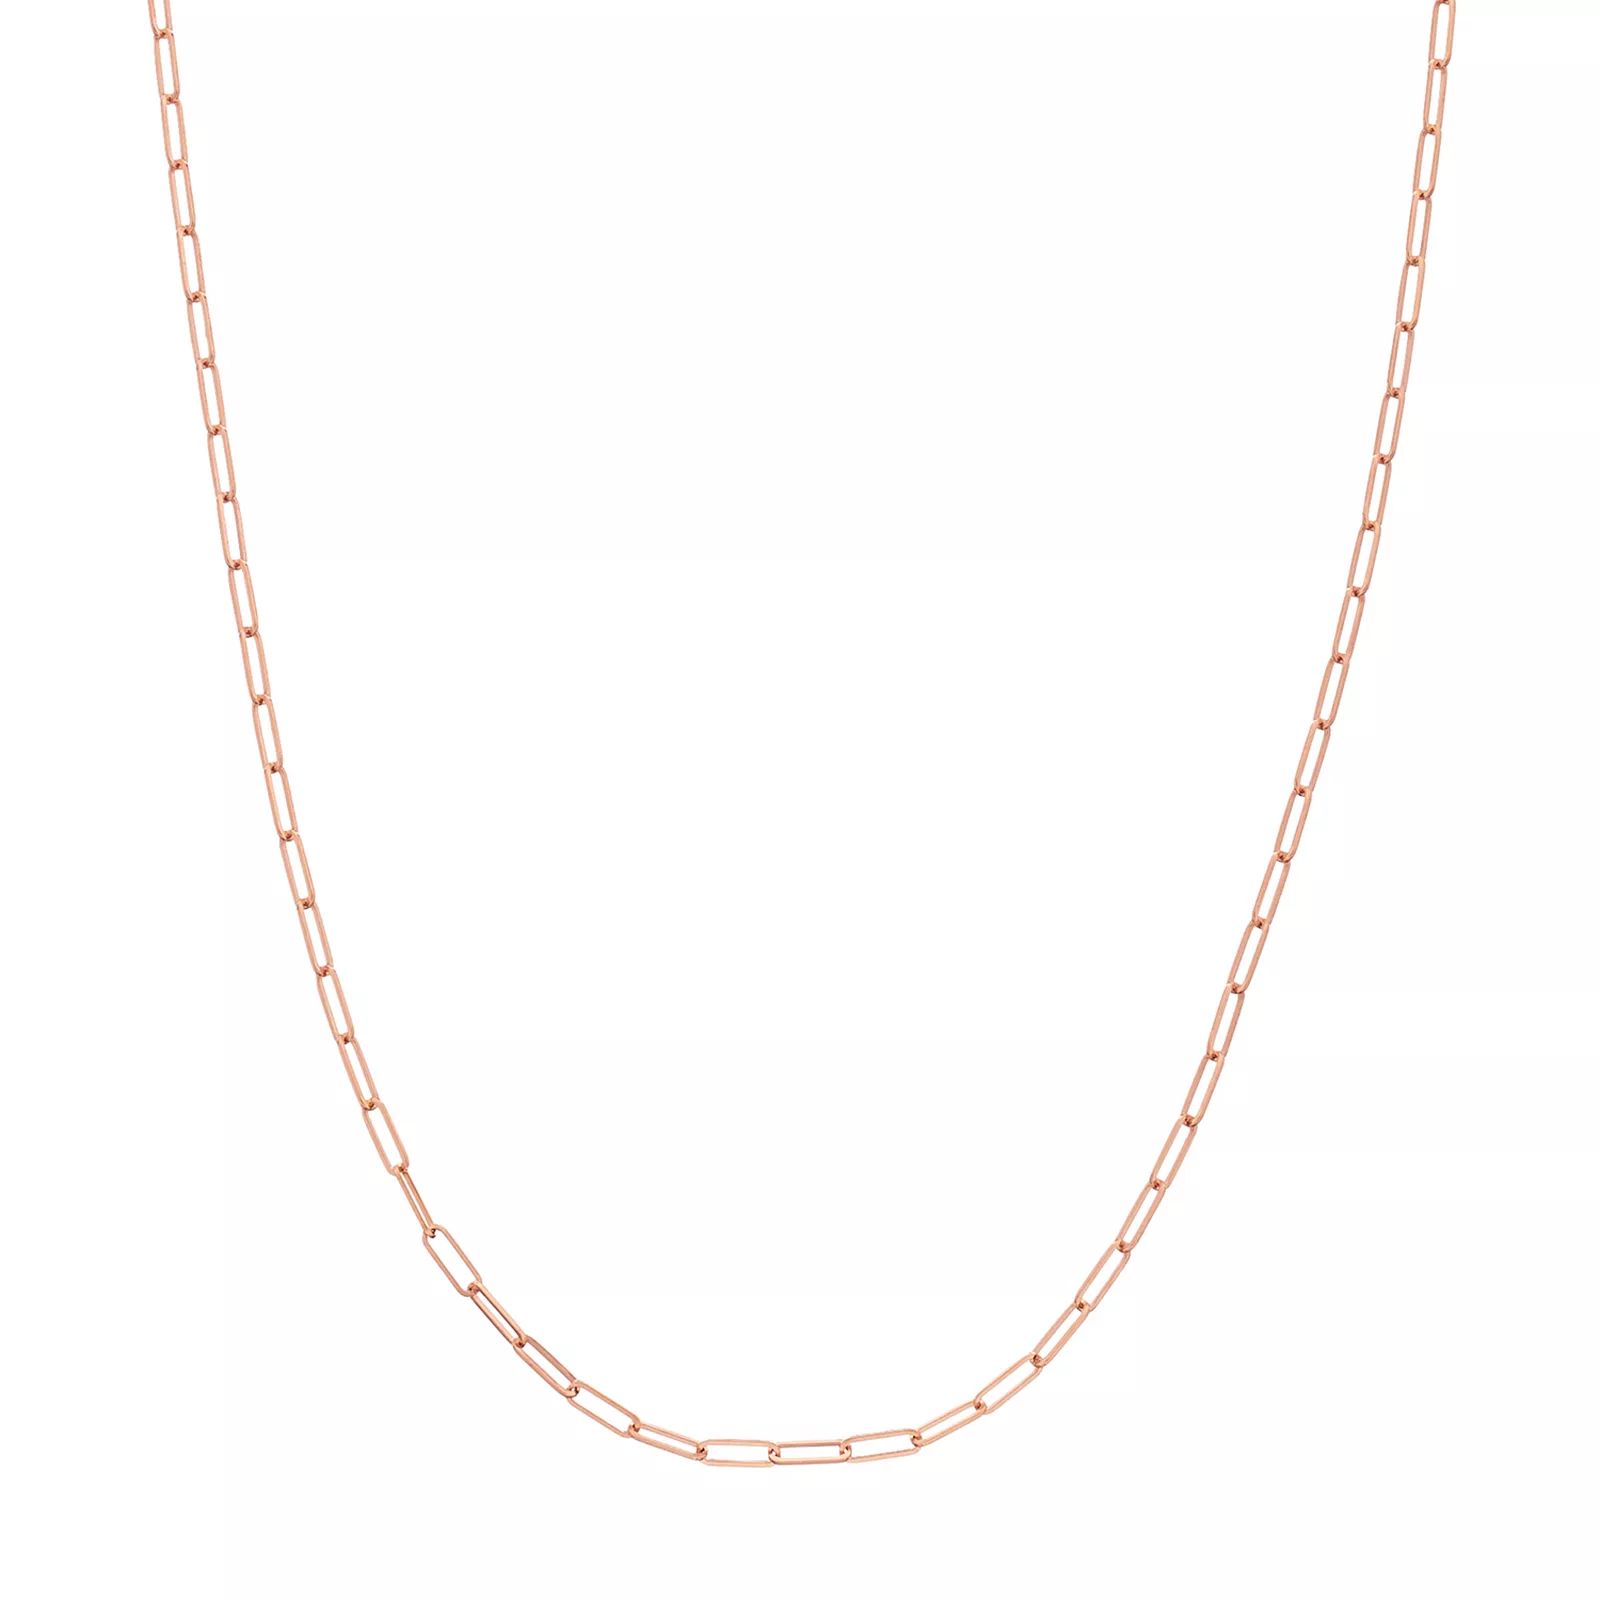 14k Gold Paper Clip Link Chain Necklace, Women's, Size: 20"", Pink | Kohl's